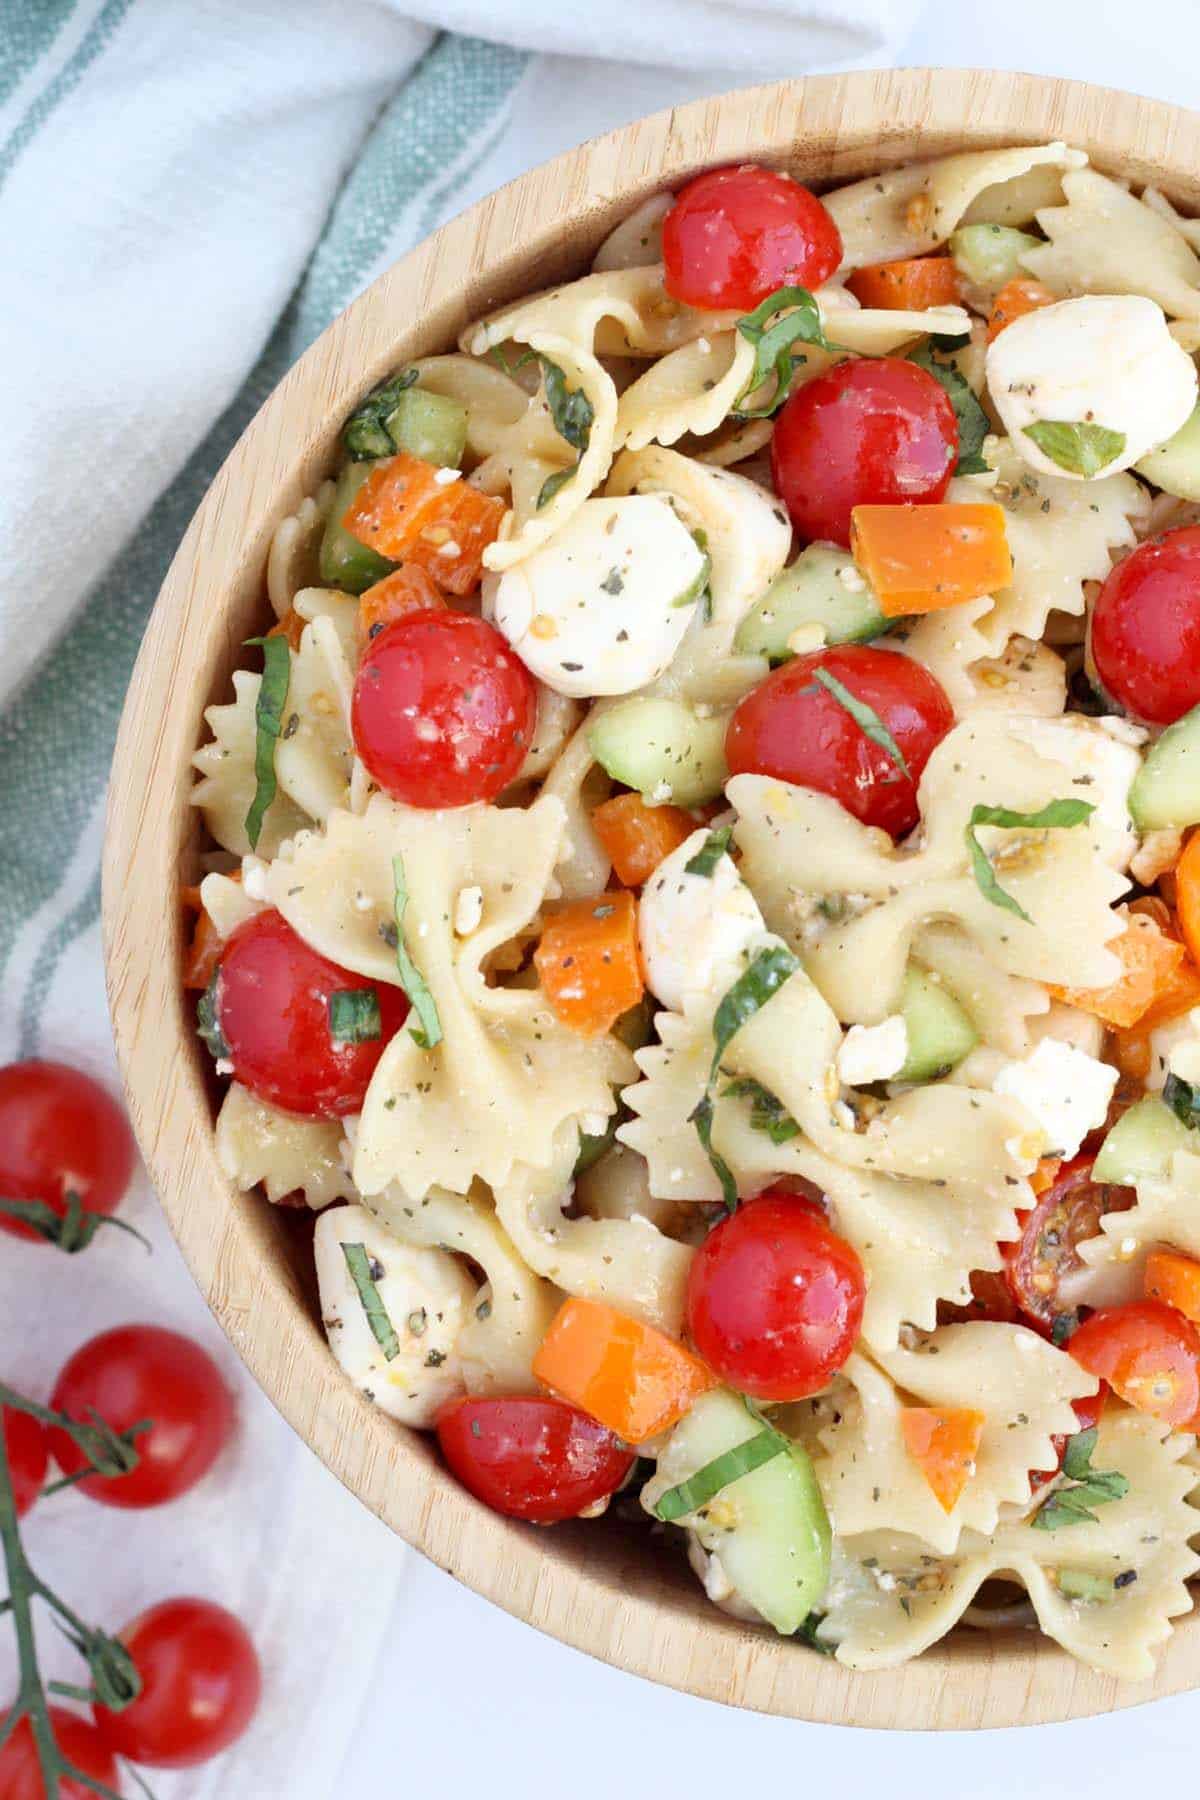 easy pasta salad with tomatoes and bell peppers in a wooden bowl